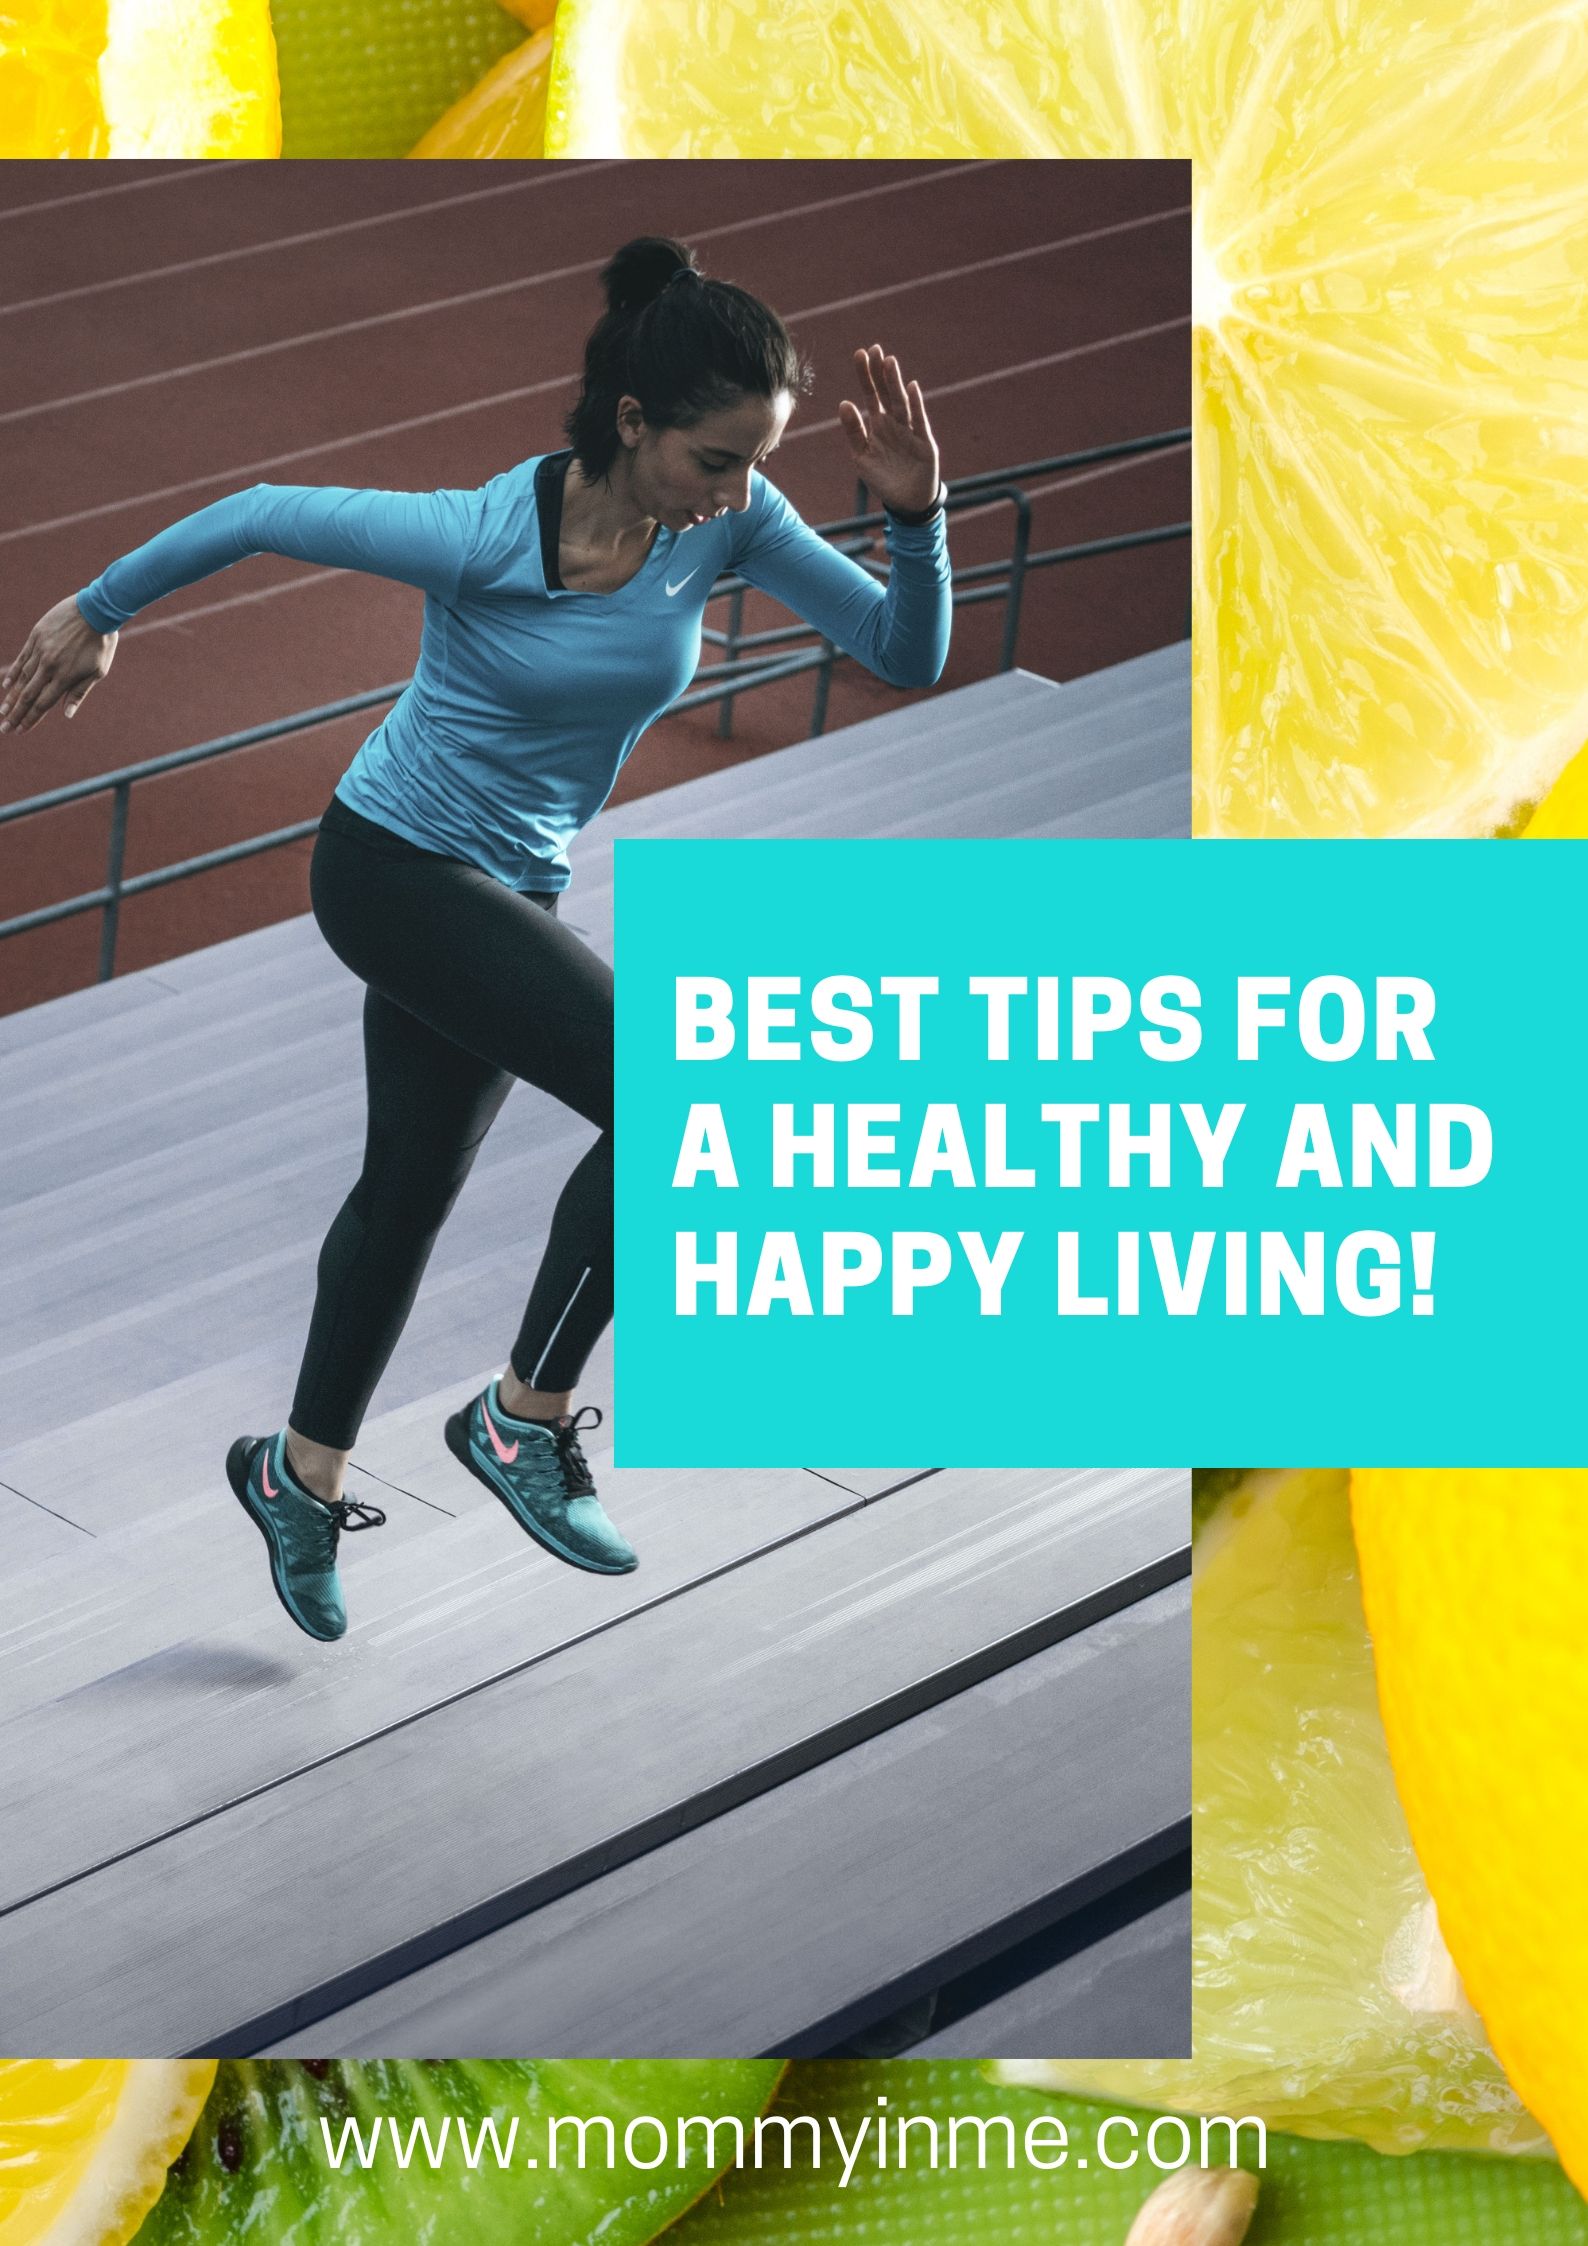 We all are running errands to leep up with our lifestyle and while going healthy is a way now, we need to know basic tips to lead this life. Here are some tips for living a healthy lifestyle in a minimalistic way #healthyliving #proteinrichfoods #dietarysupplements #supplements #water #stretching #exercise #workout #simpleliving